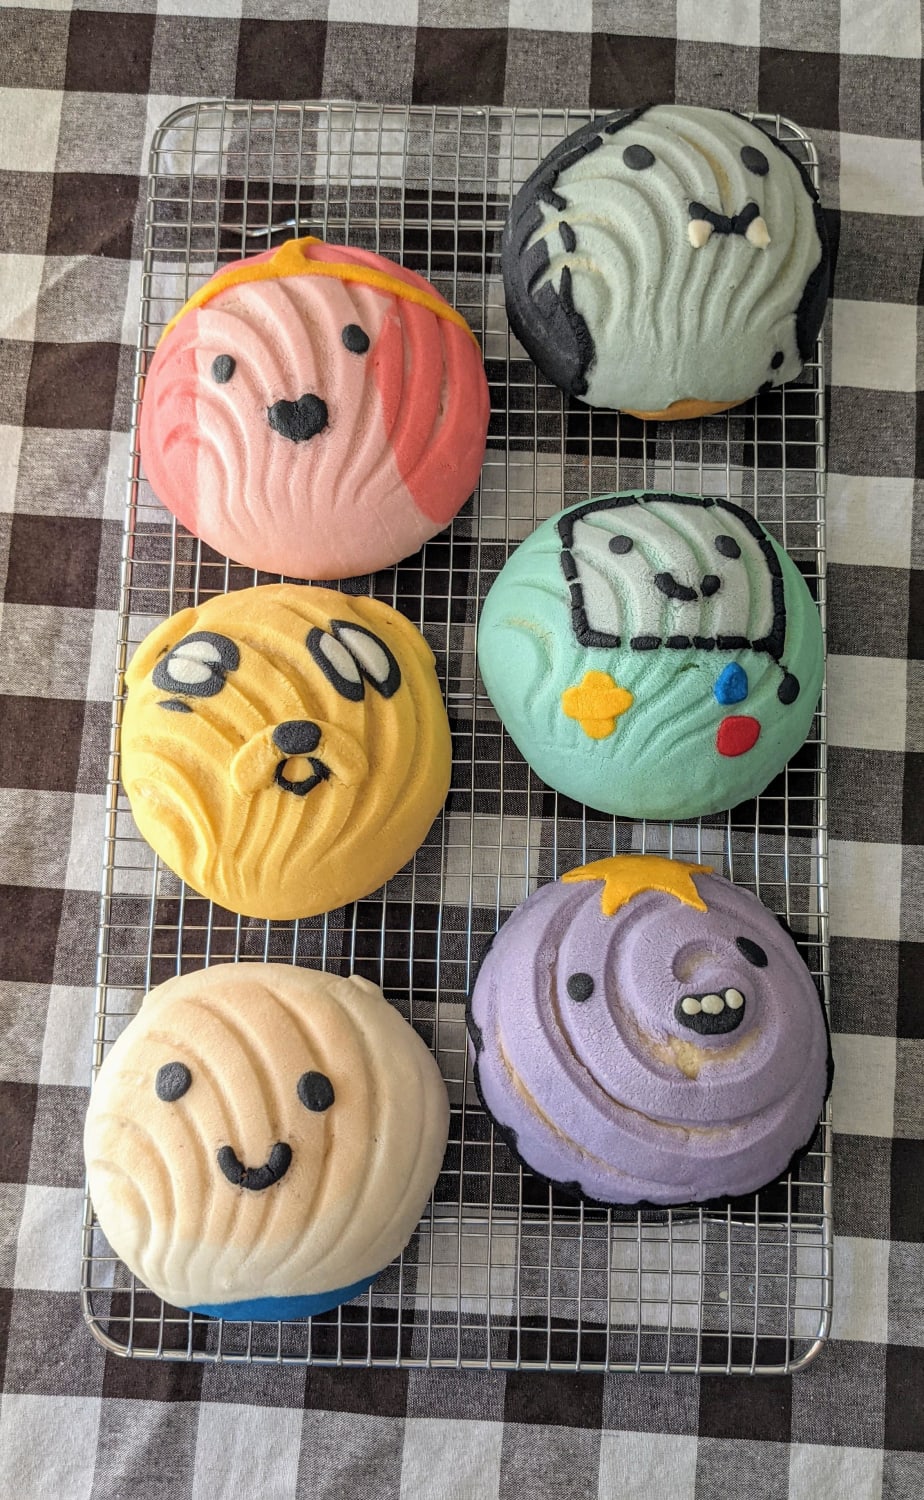 Conchas! But make them Adventure Time themed. Had a lovely time making these for an awesome customer. I love exploring the versatility of conchas.